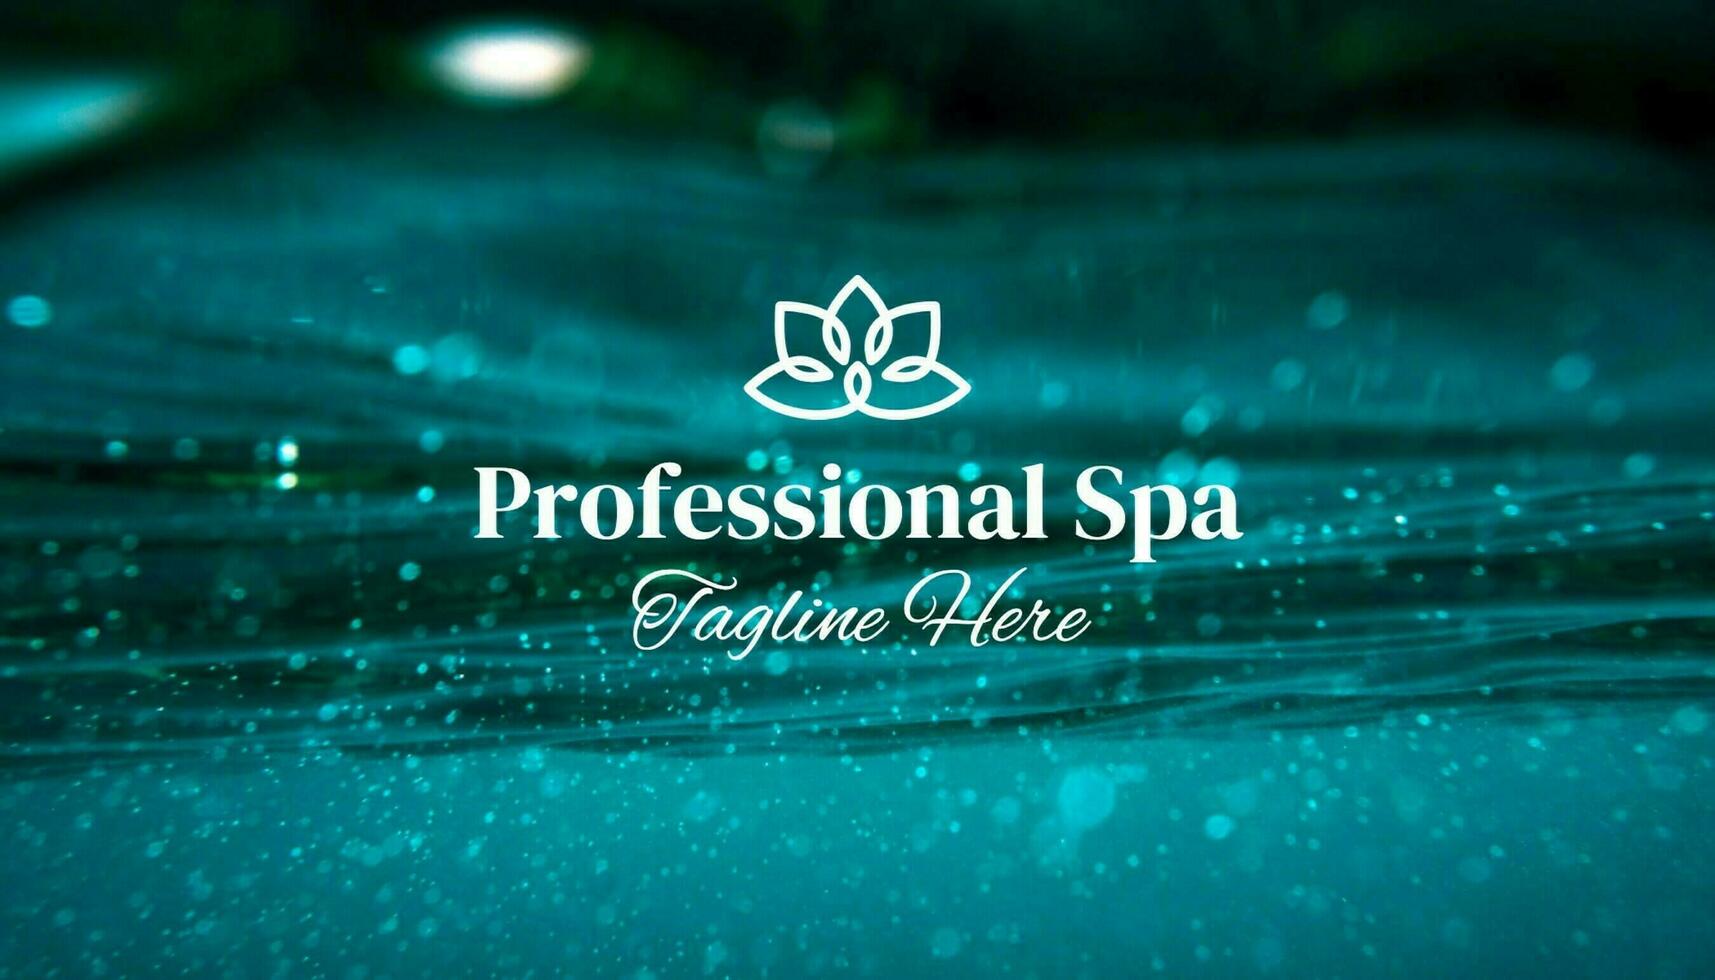 Professional Spa Business Card template